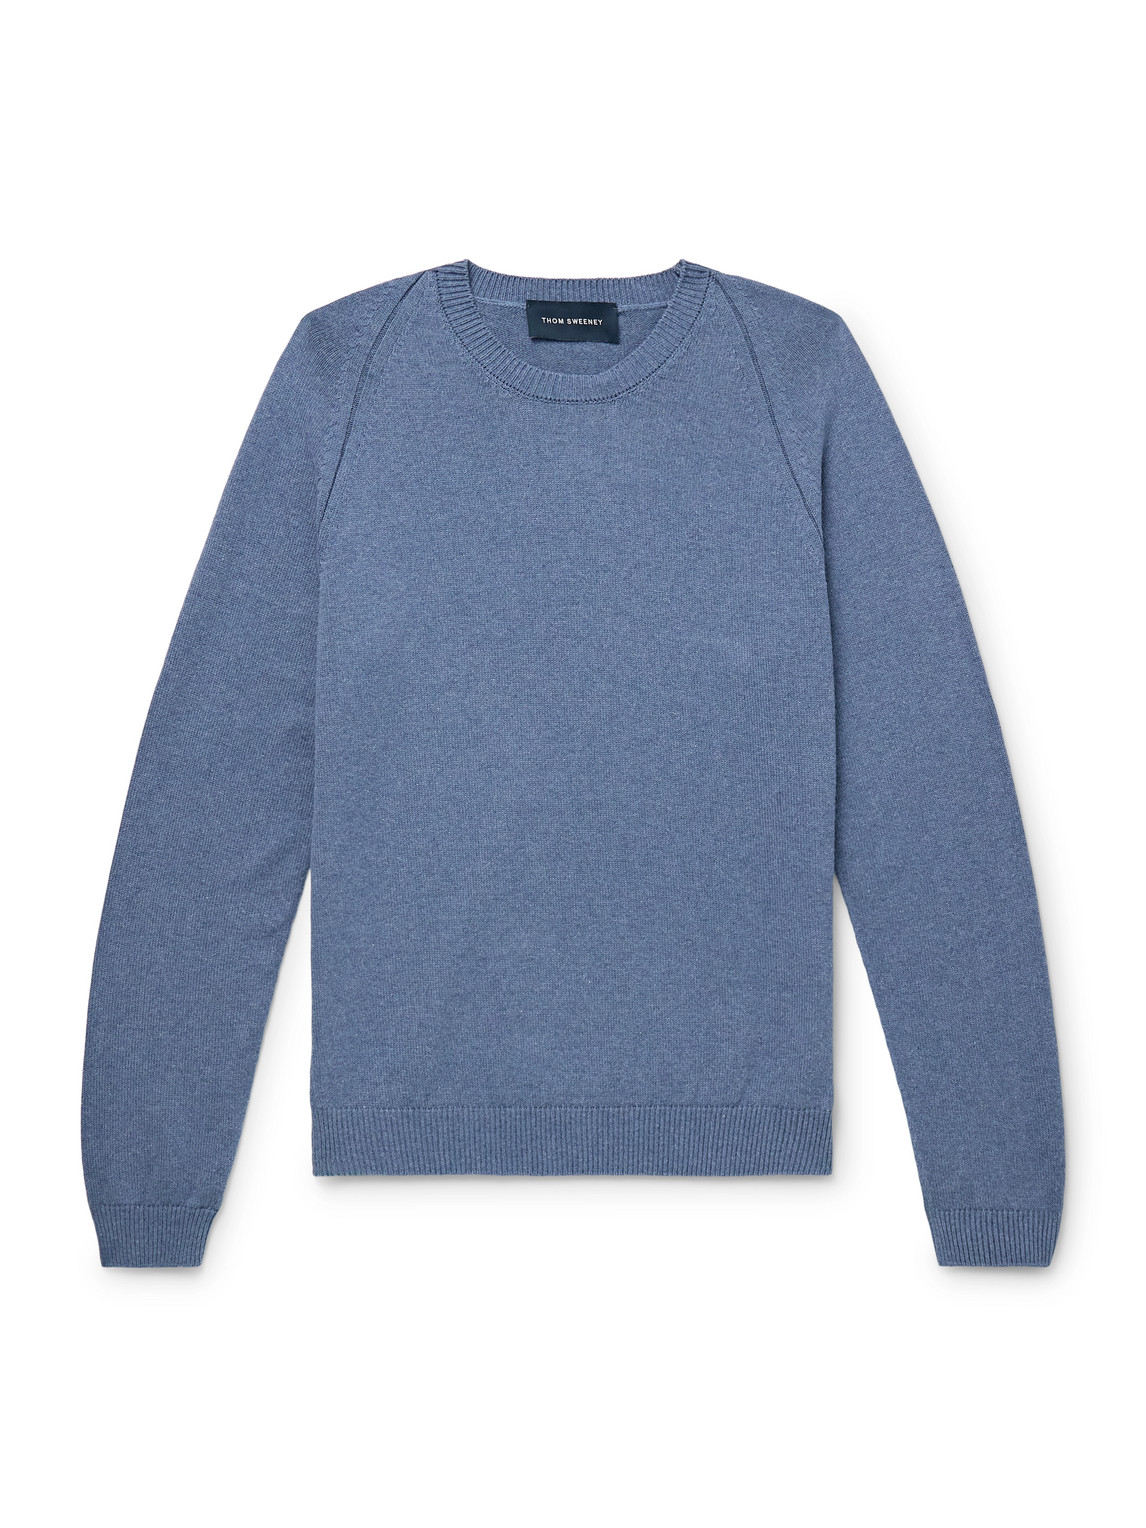 Thom Sweeney Cotton Sweater In Blue